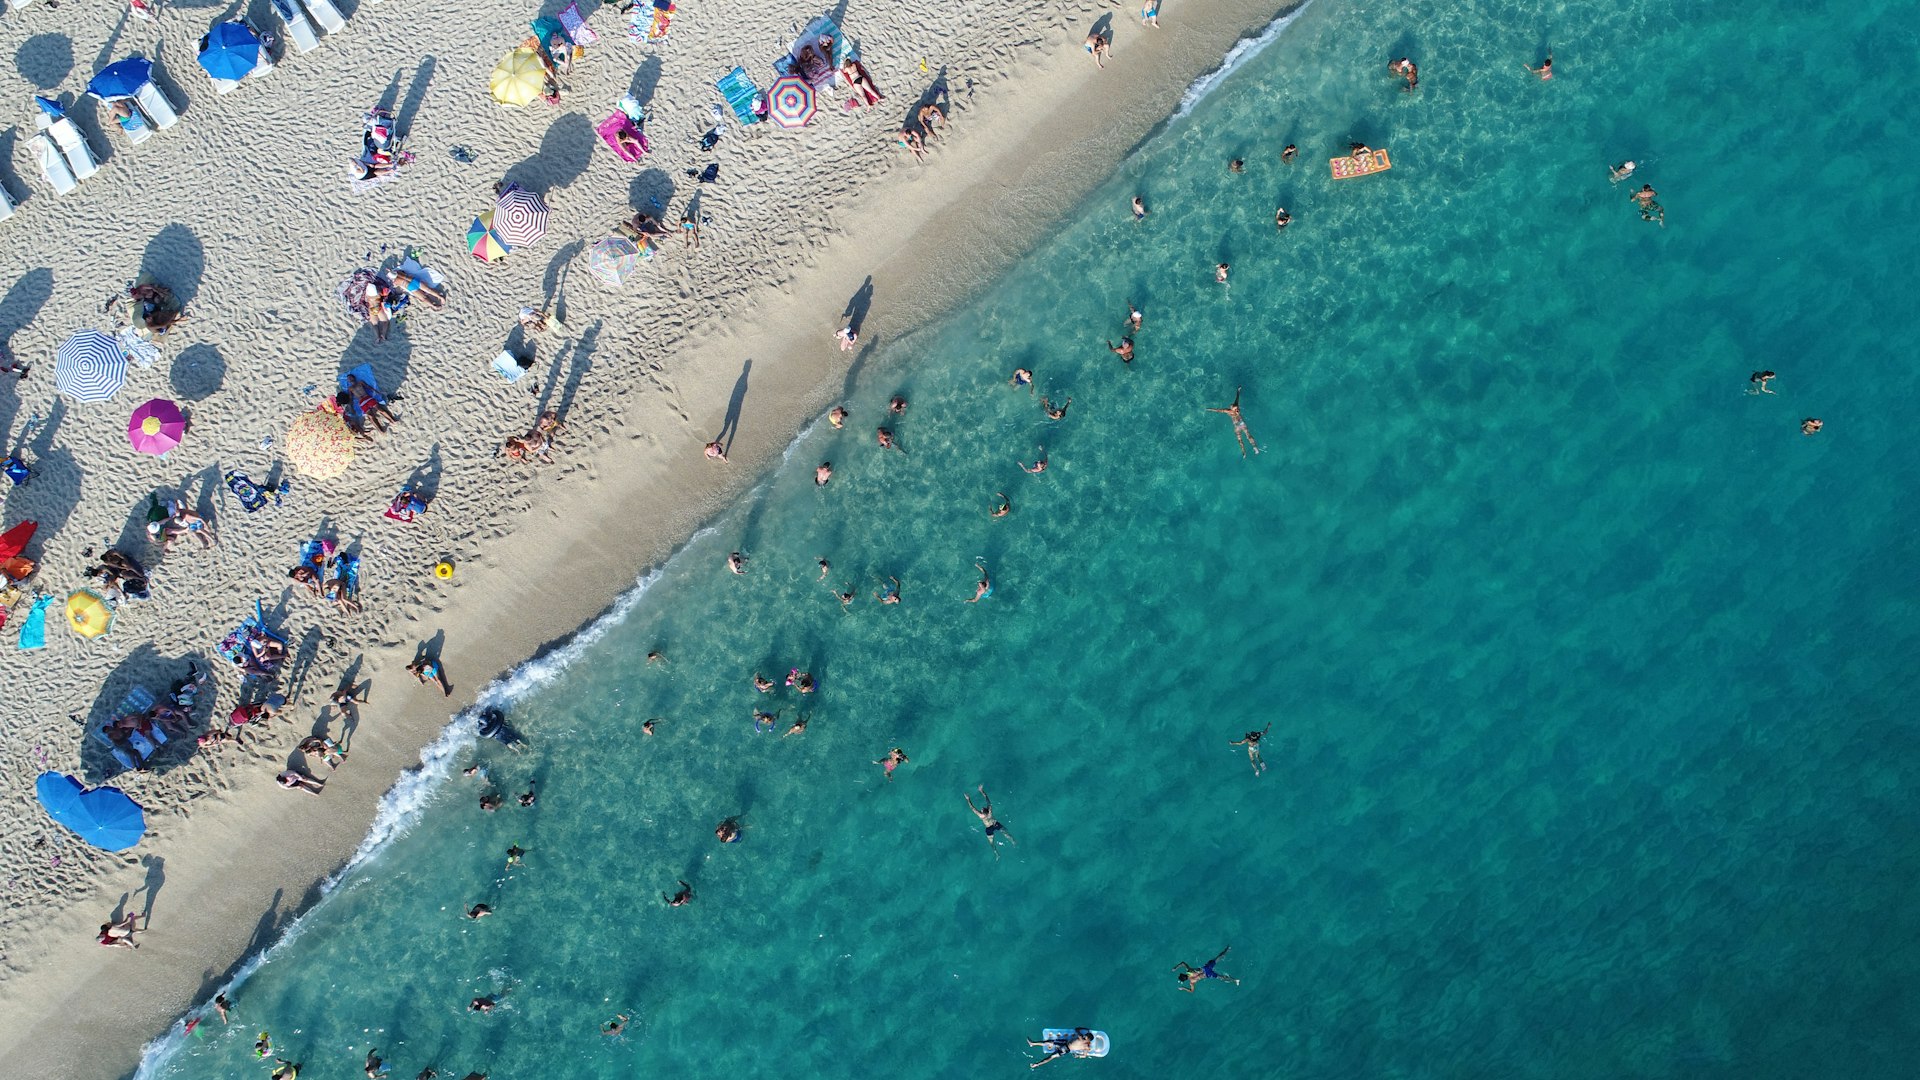 An aerial view of a beach shows colourful umbrellas on the shore and swimmers in the water. 